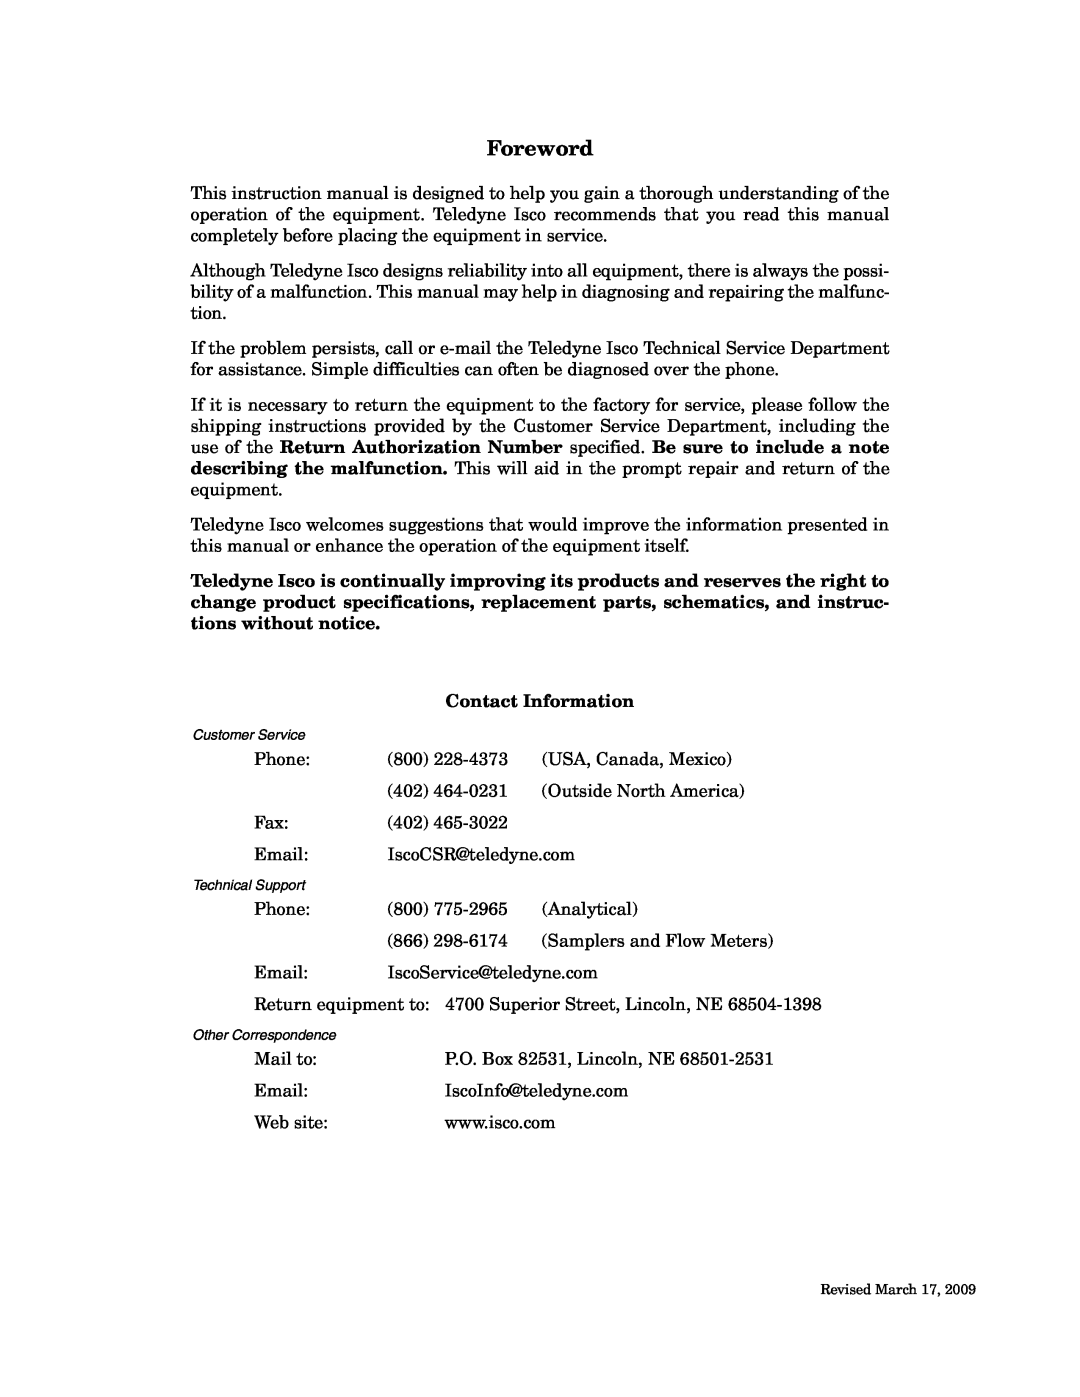 Teledyne 6712FR manual Foreword, Contact Information 